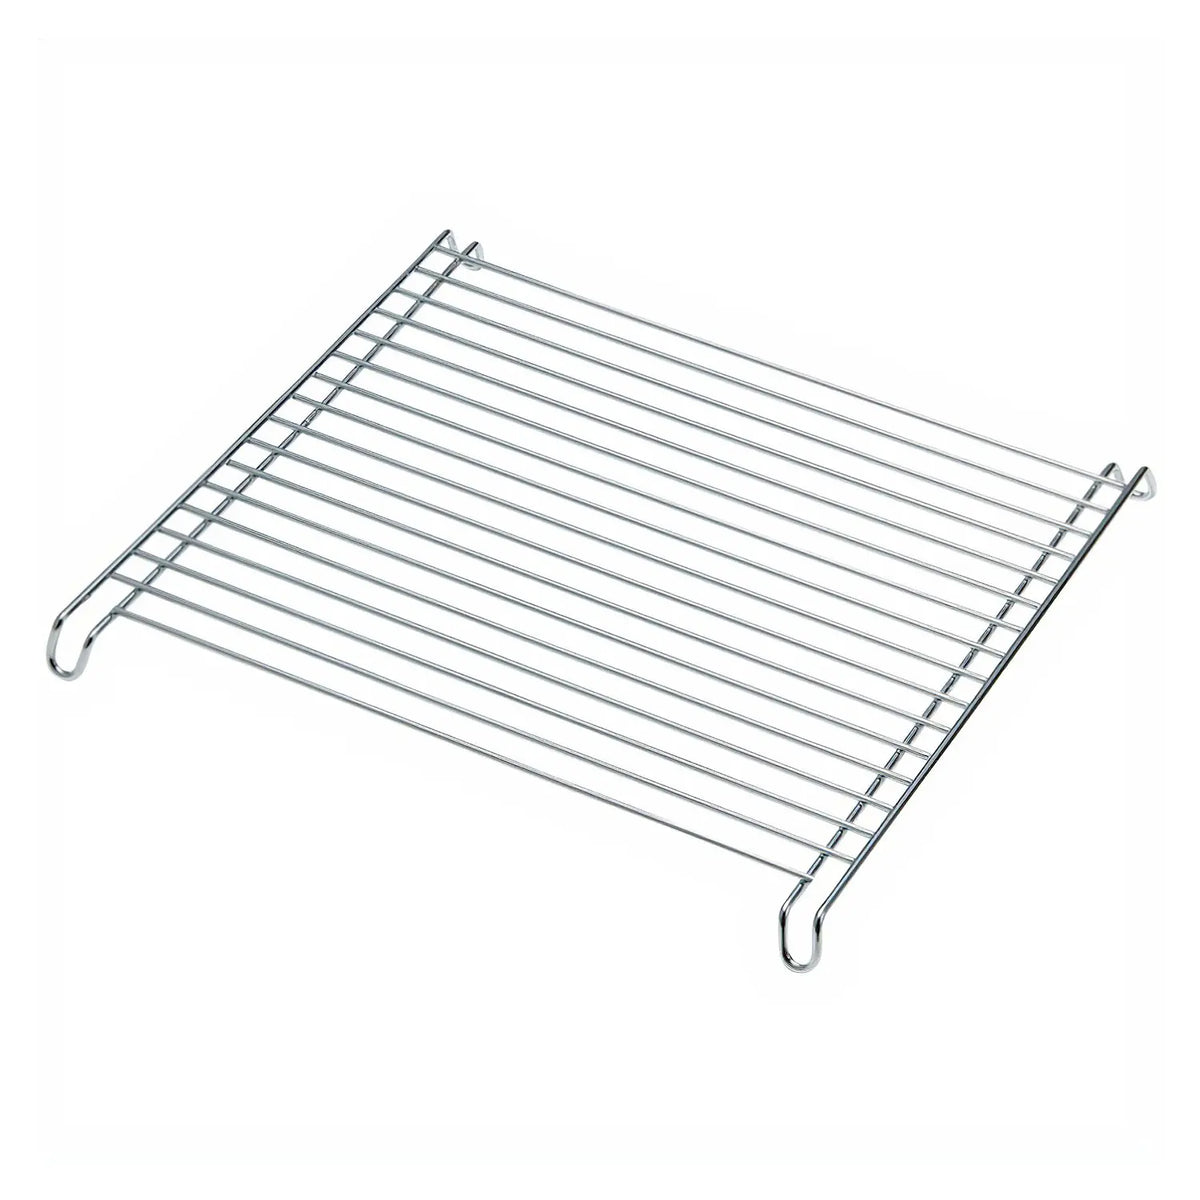 TIGERCROWN Cake Land Steel Square Cake Cooling Rack with Feet